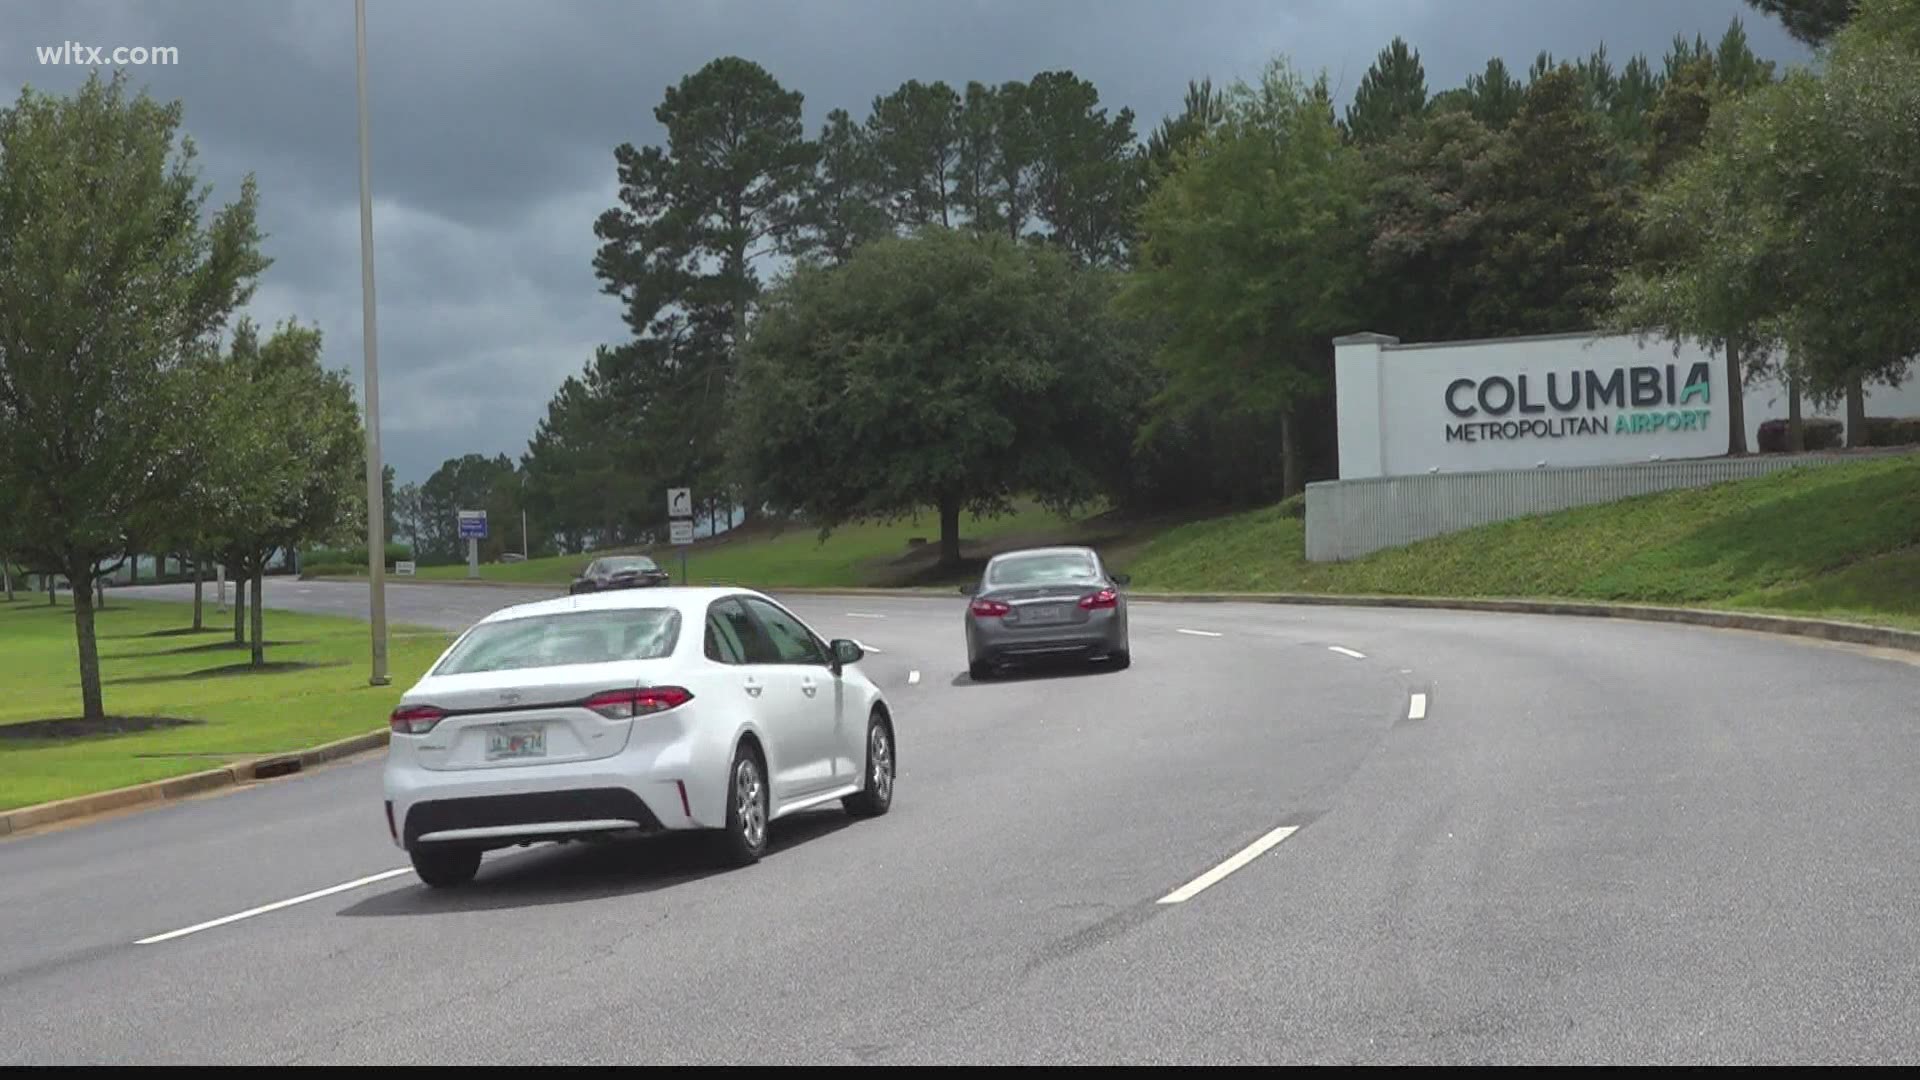 The Columbia Airport has seen a near 400% increase in traffic in 2021.